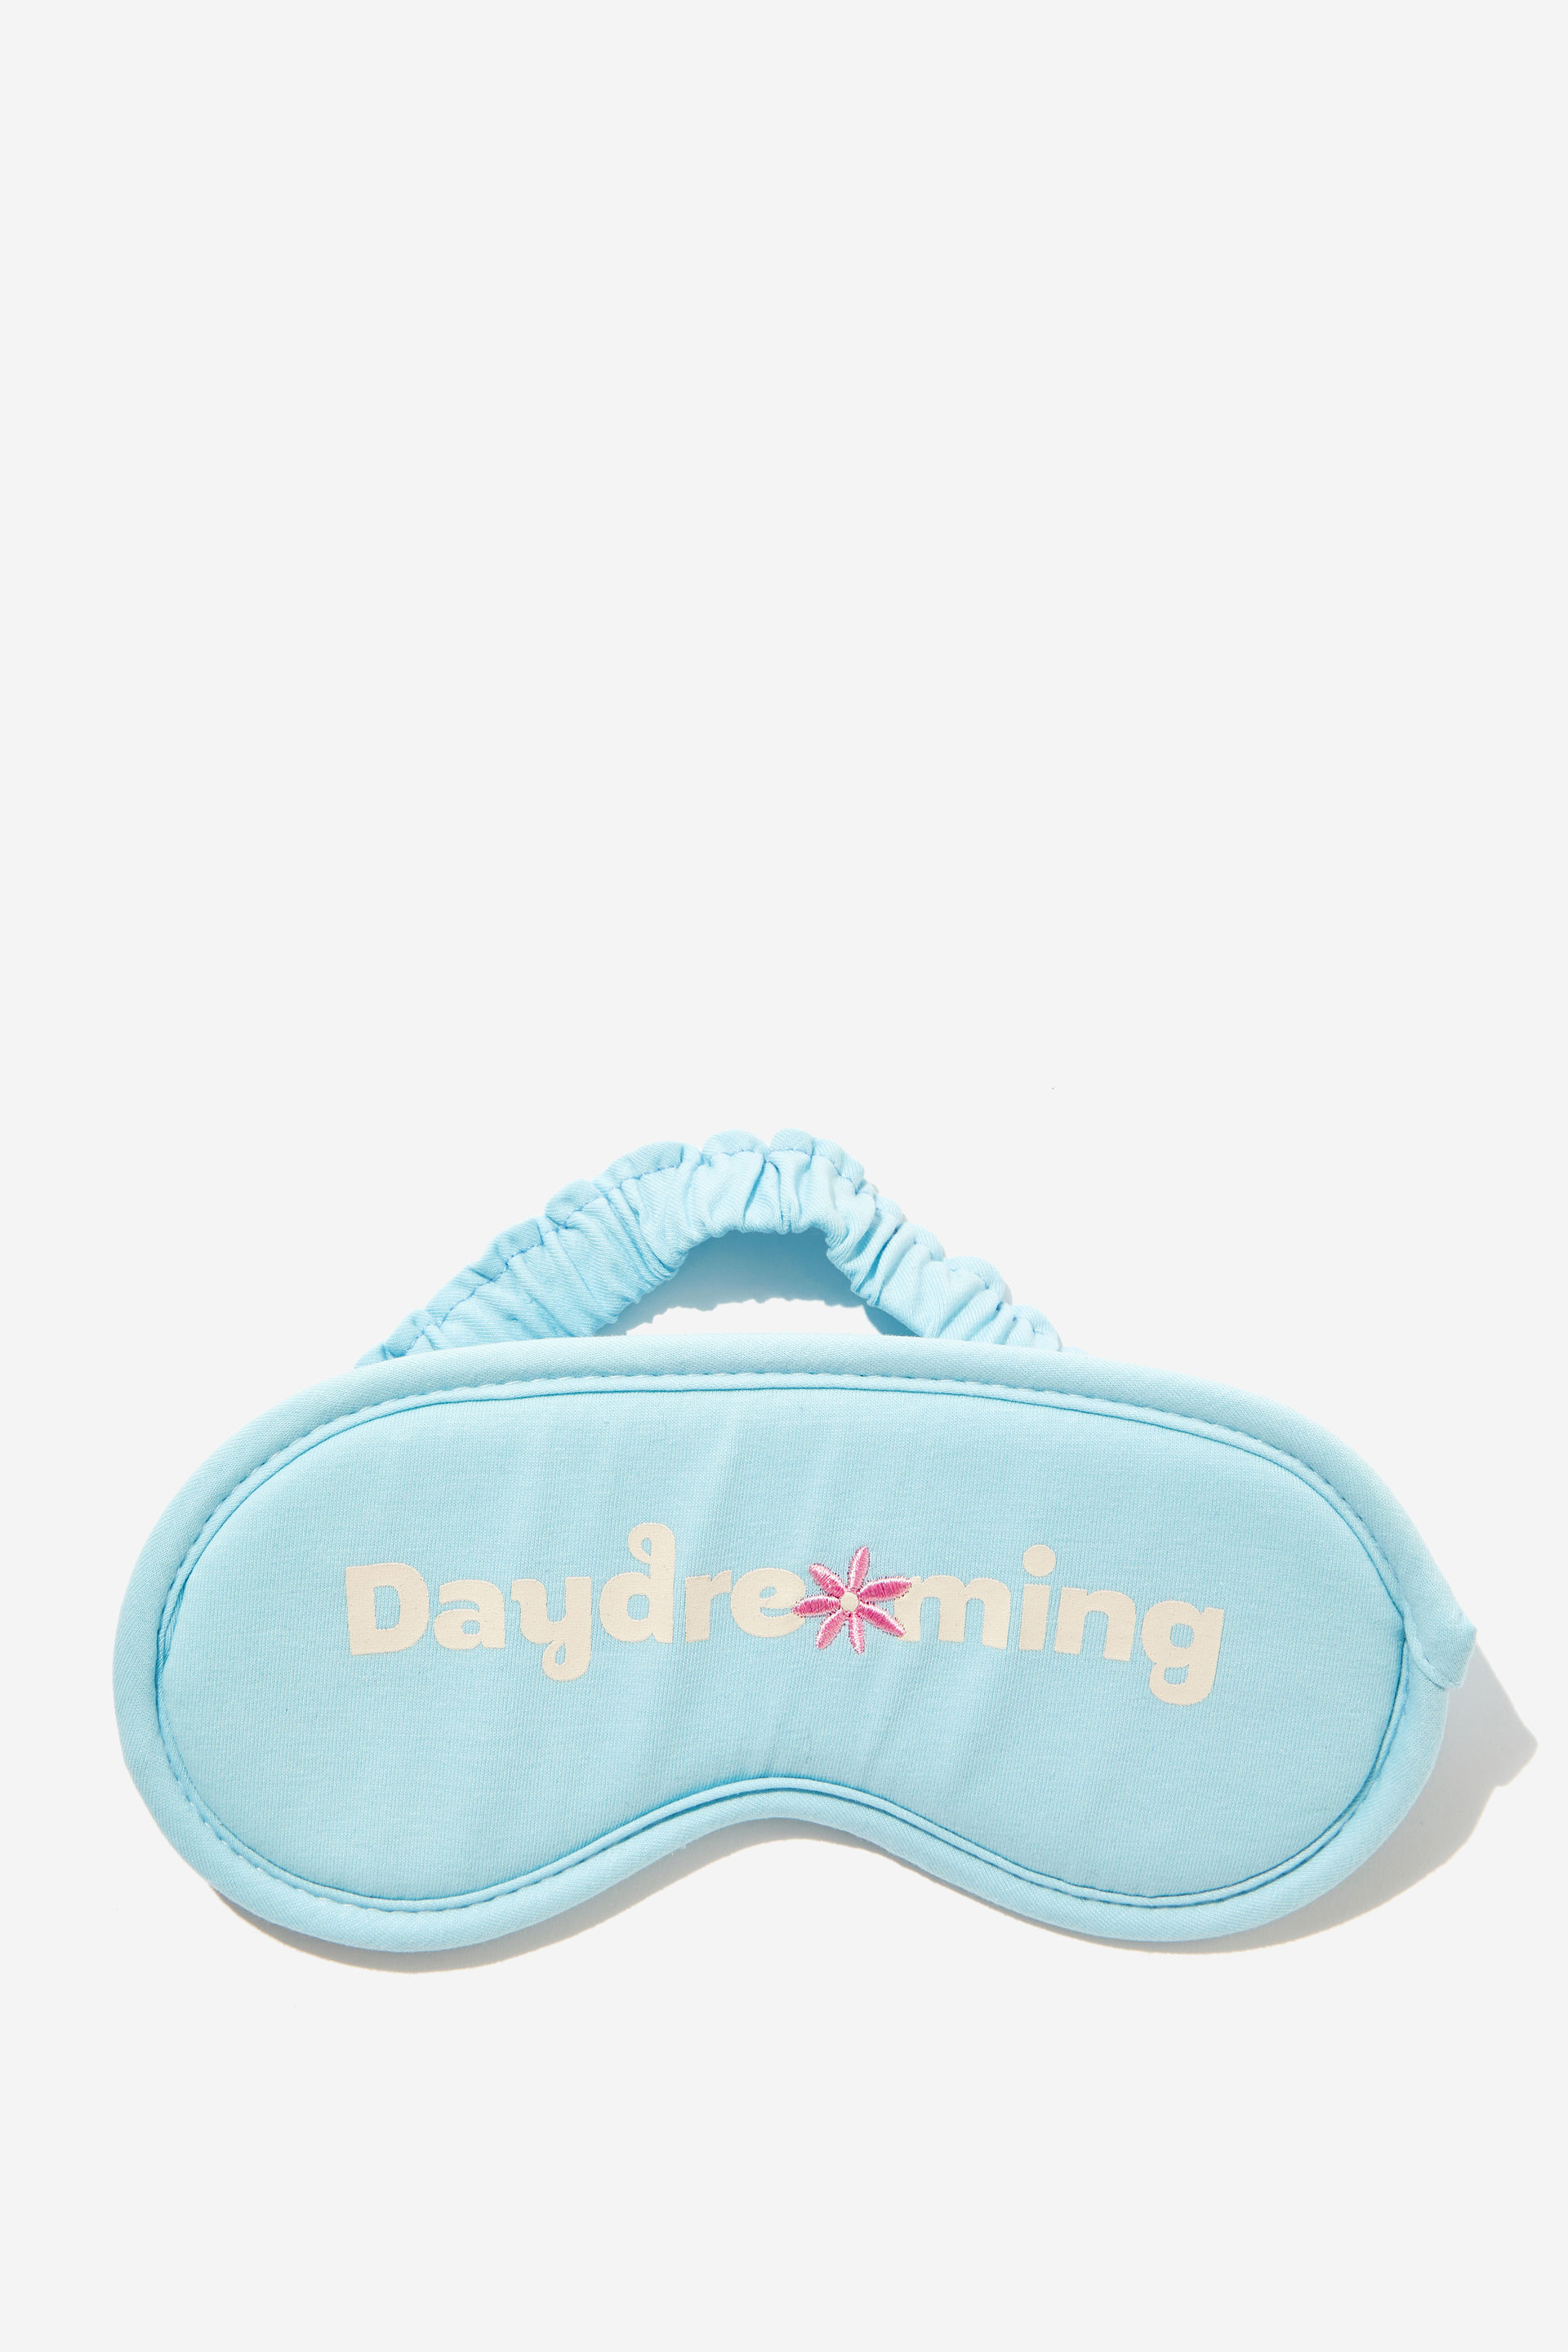 Typo - Off The Grid Eyemask - Daydreaming/ arctic blue